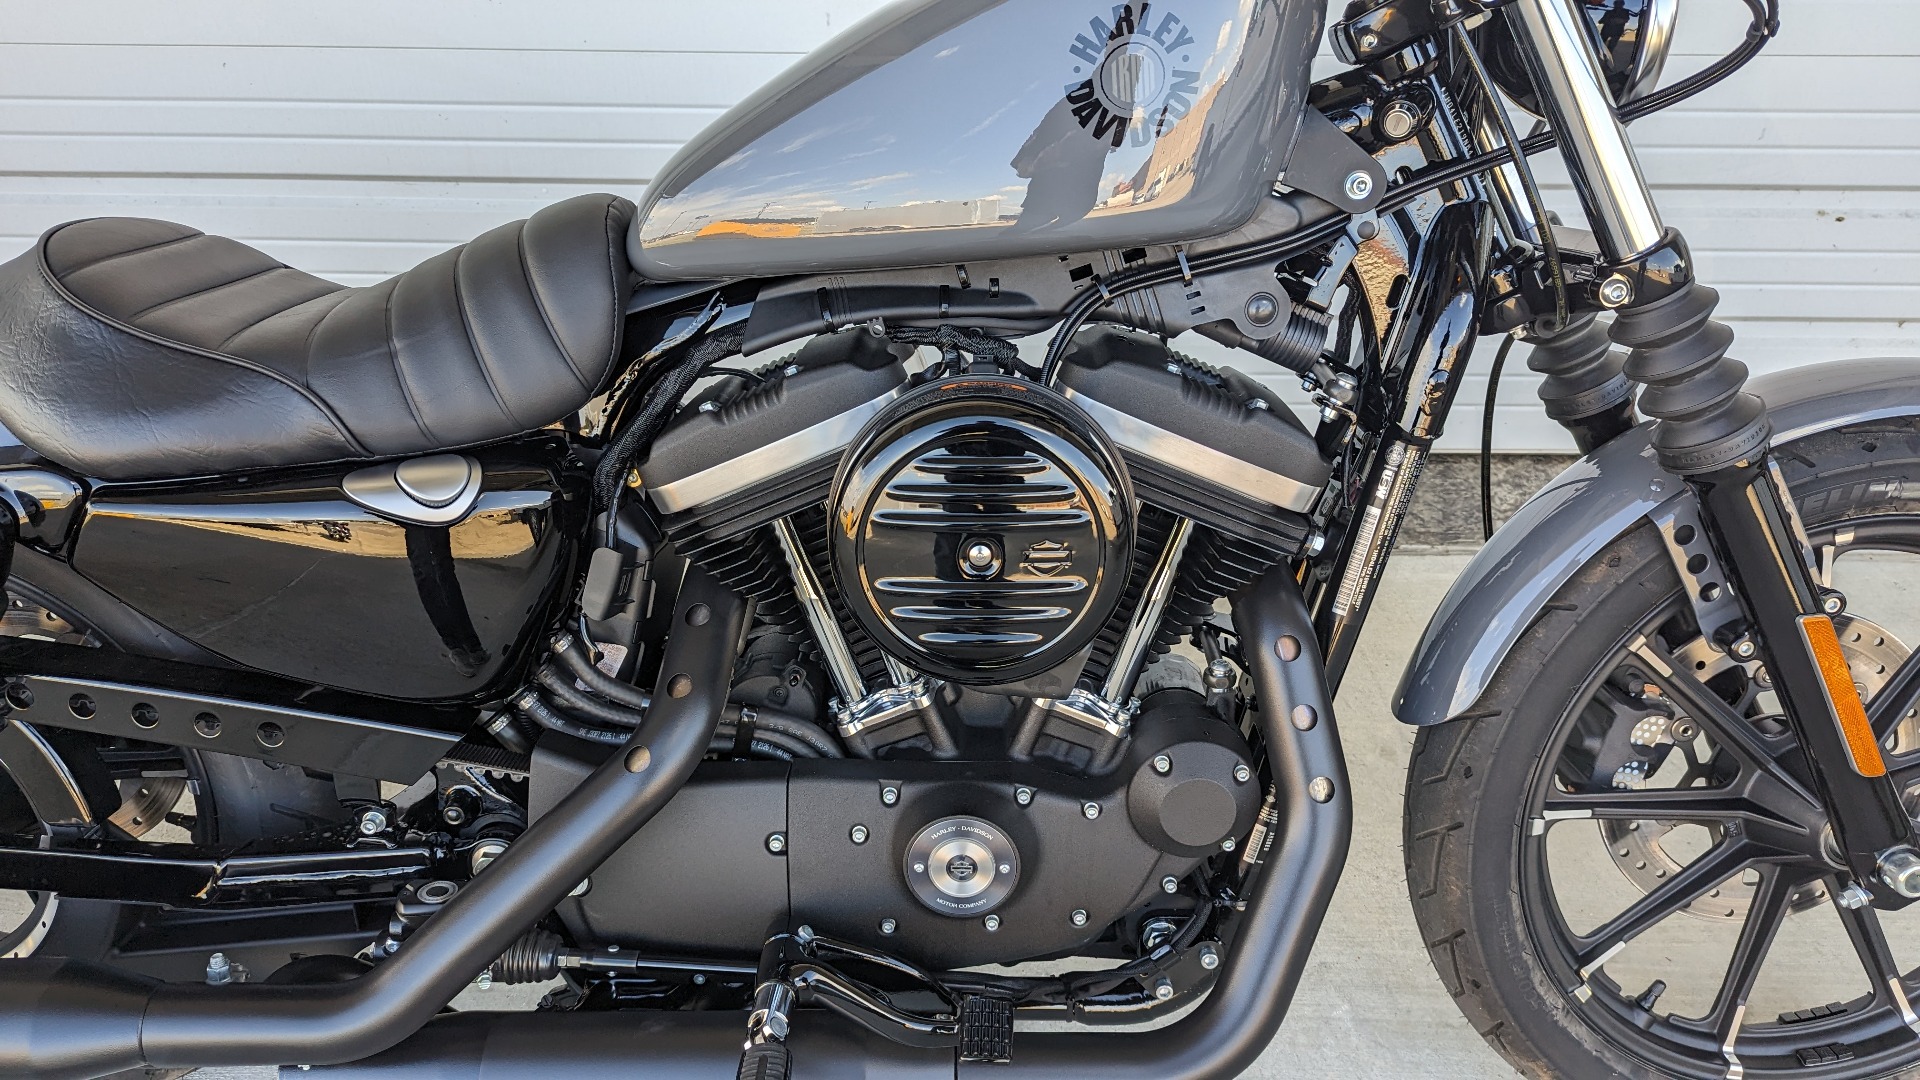 2022 harley sportster iron 883 for sale in dallas - Photo 4